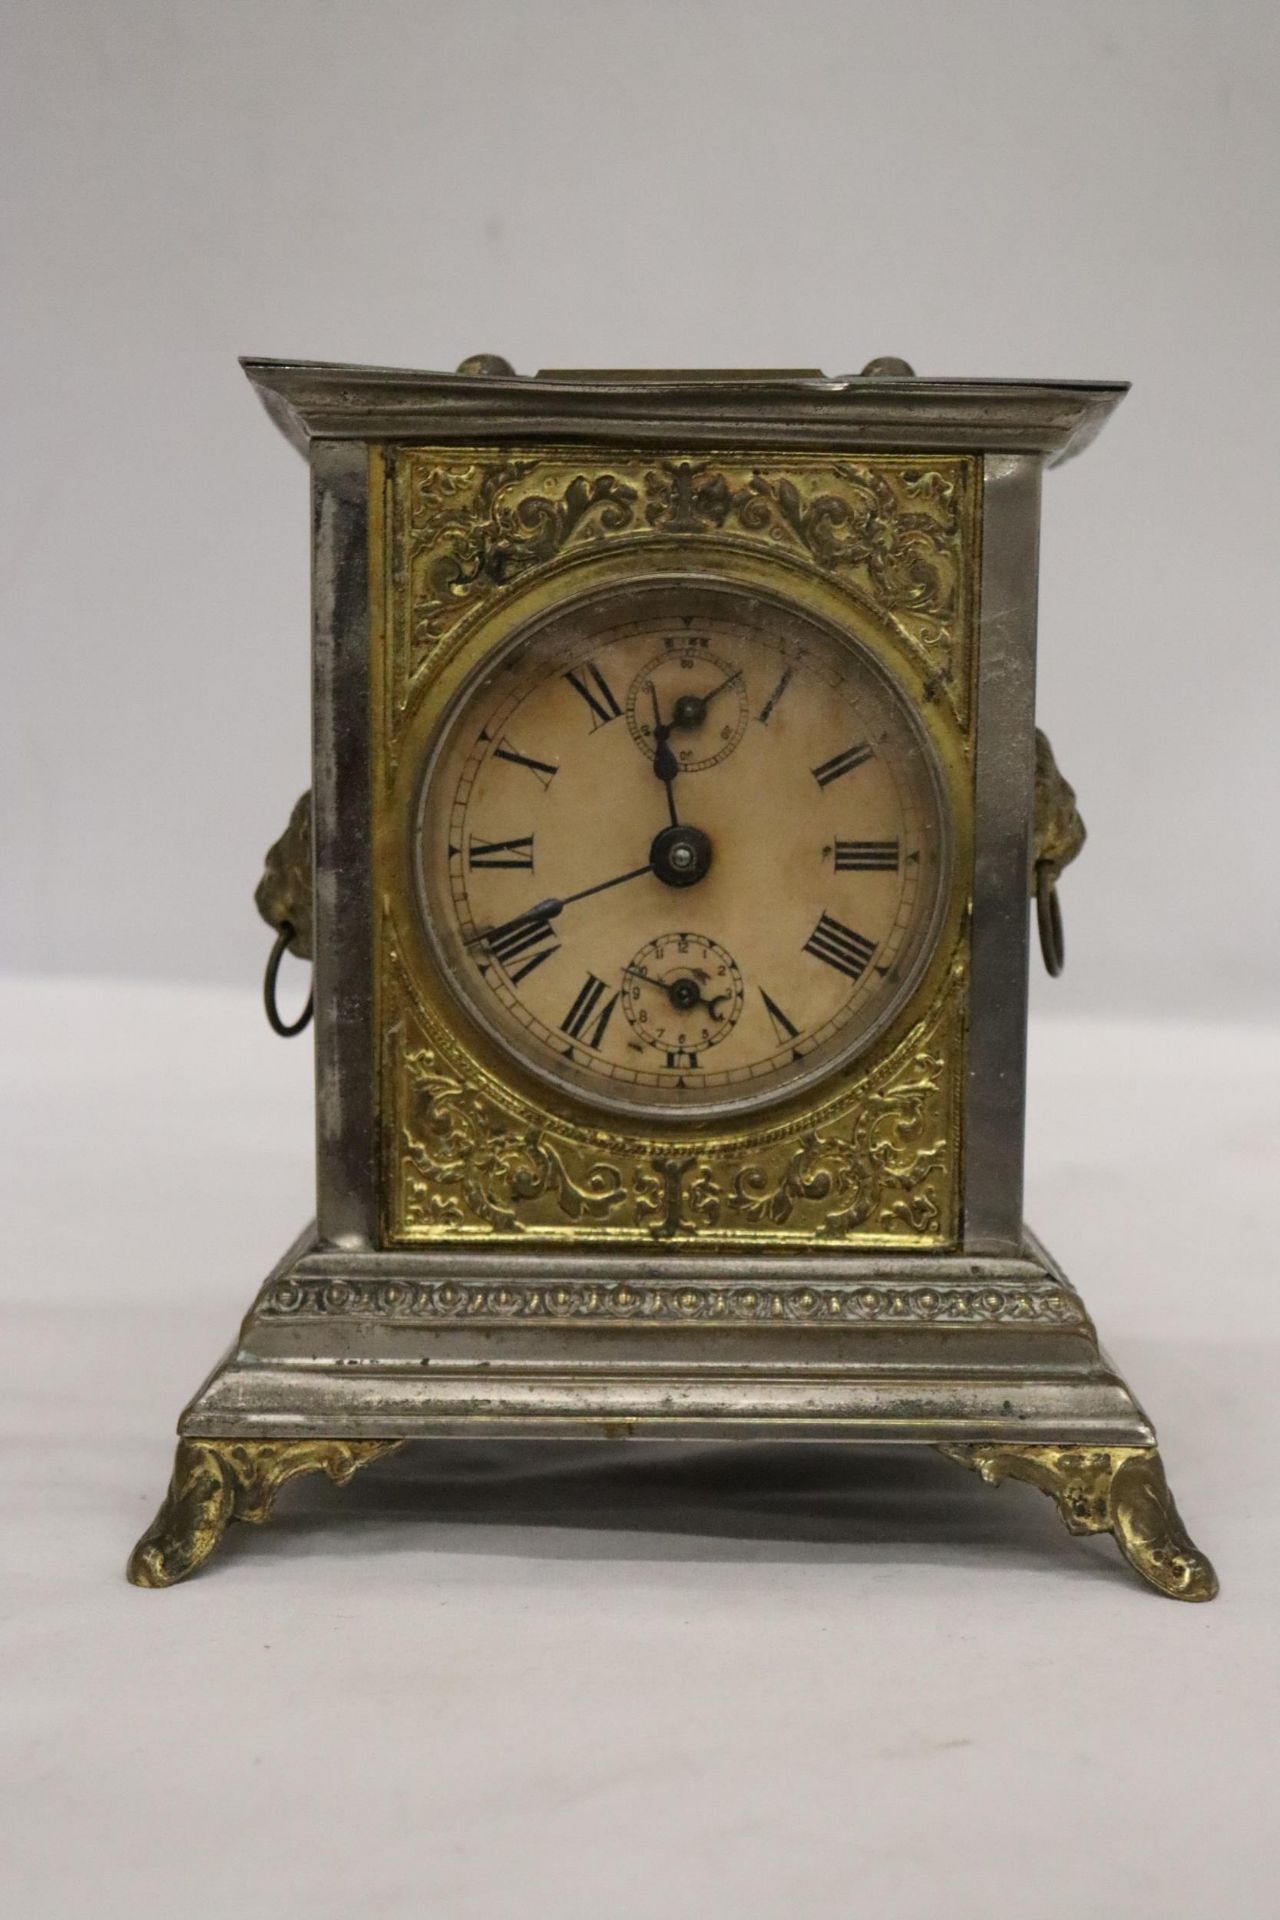 AN ORNATE VINTAGE ALARM CARRIAGE CLOCK WITH LION HANDLE DECORATION TO THE SIDES - POSSIBLY AN